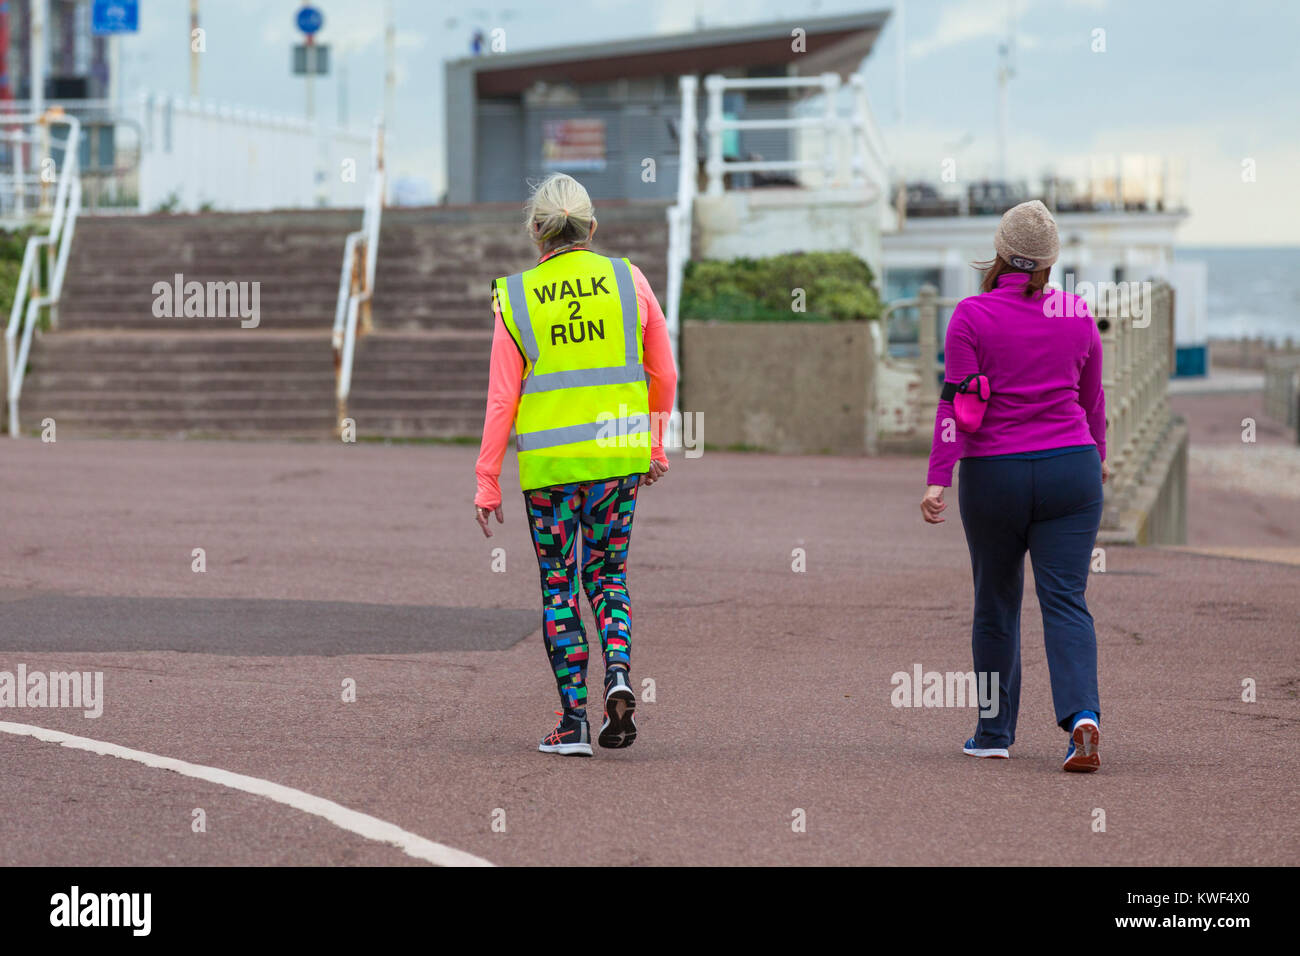 Two woman walking along the hastings promenade hi-vis jacket walk 2 run overcast day, East Sussex Stock Photo